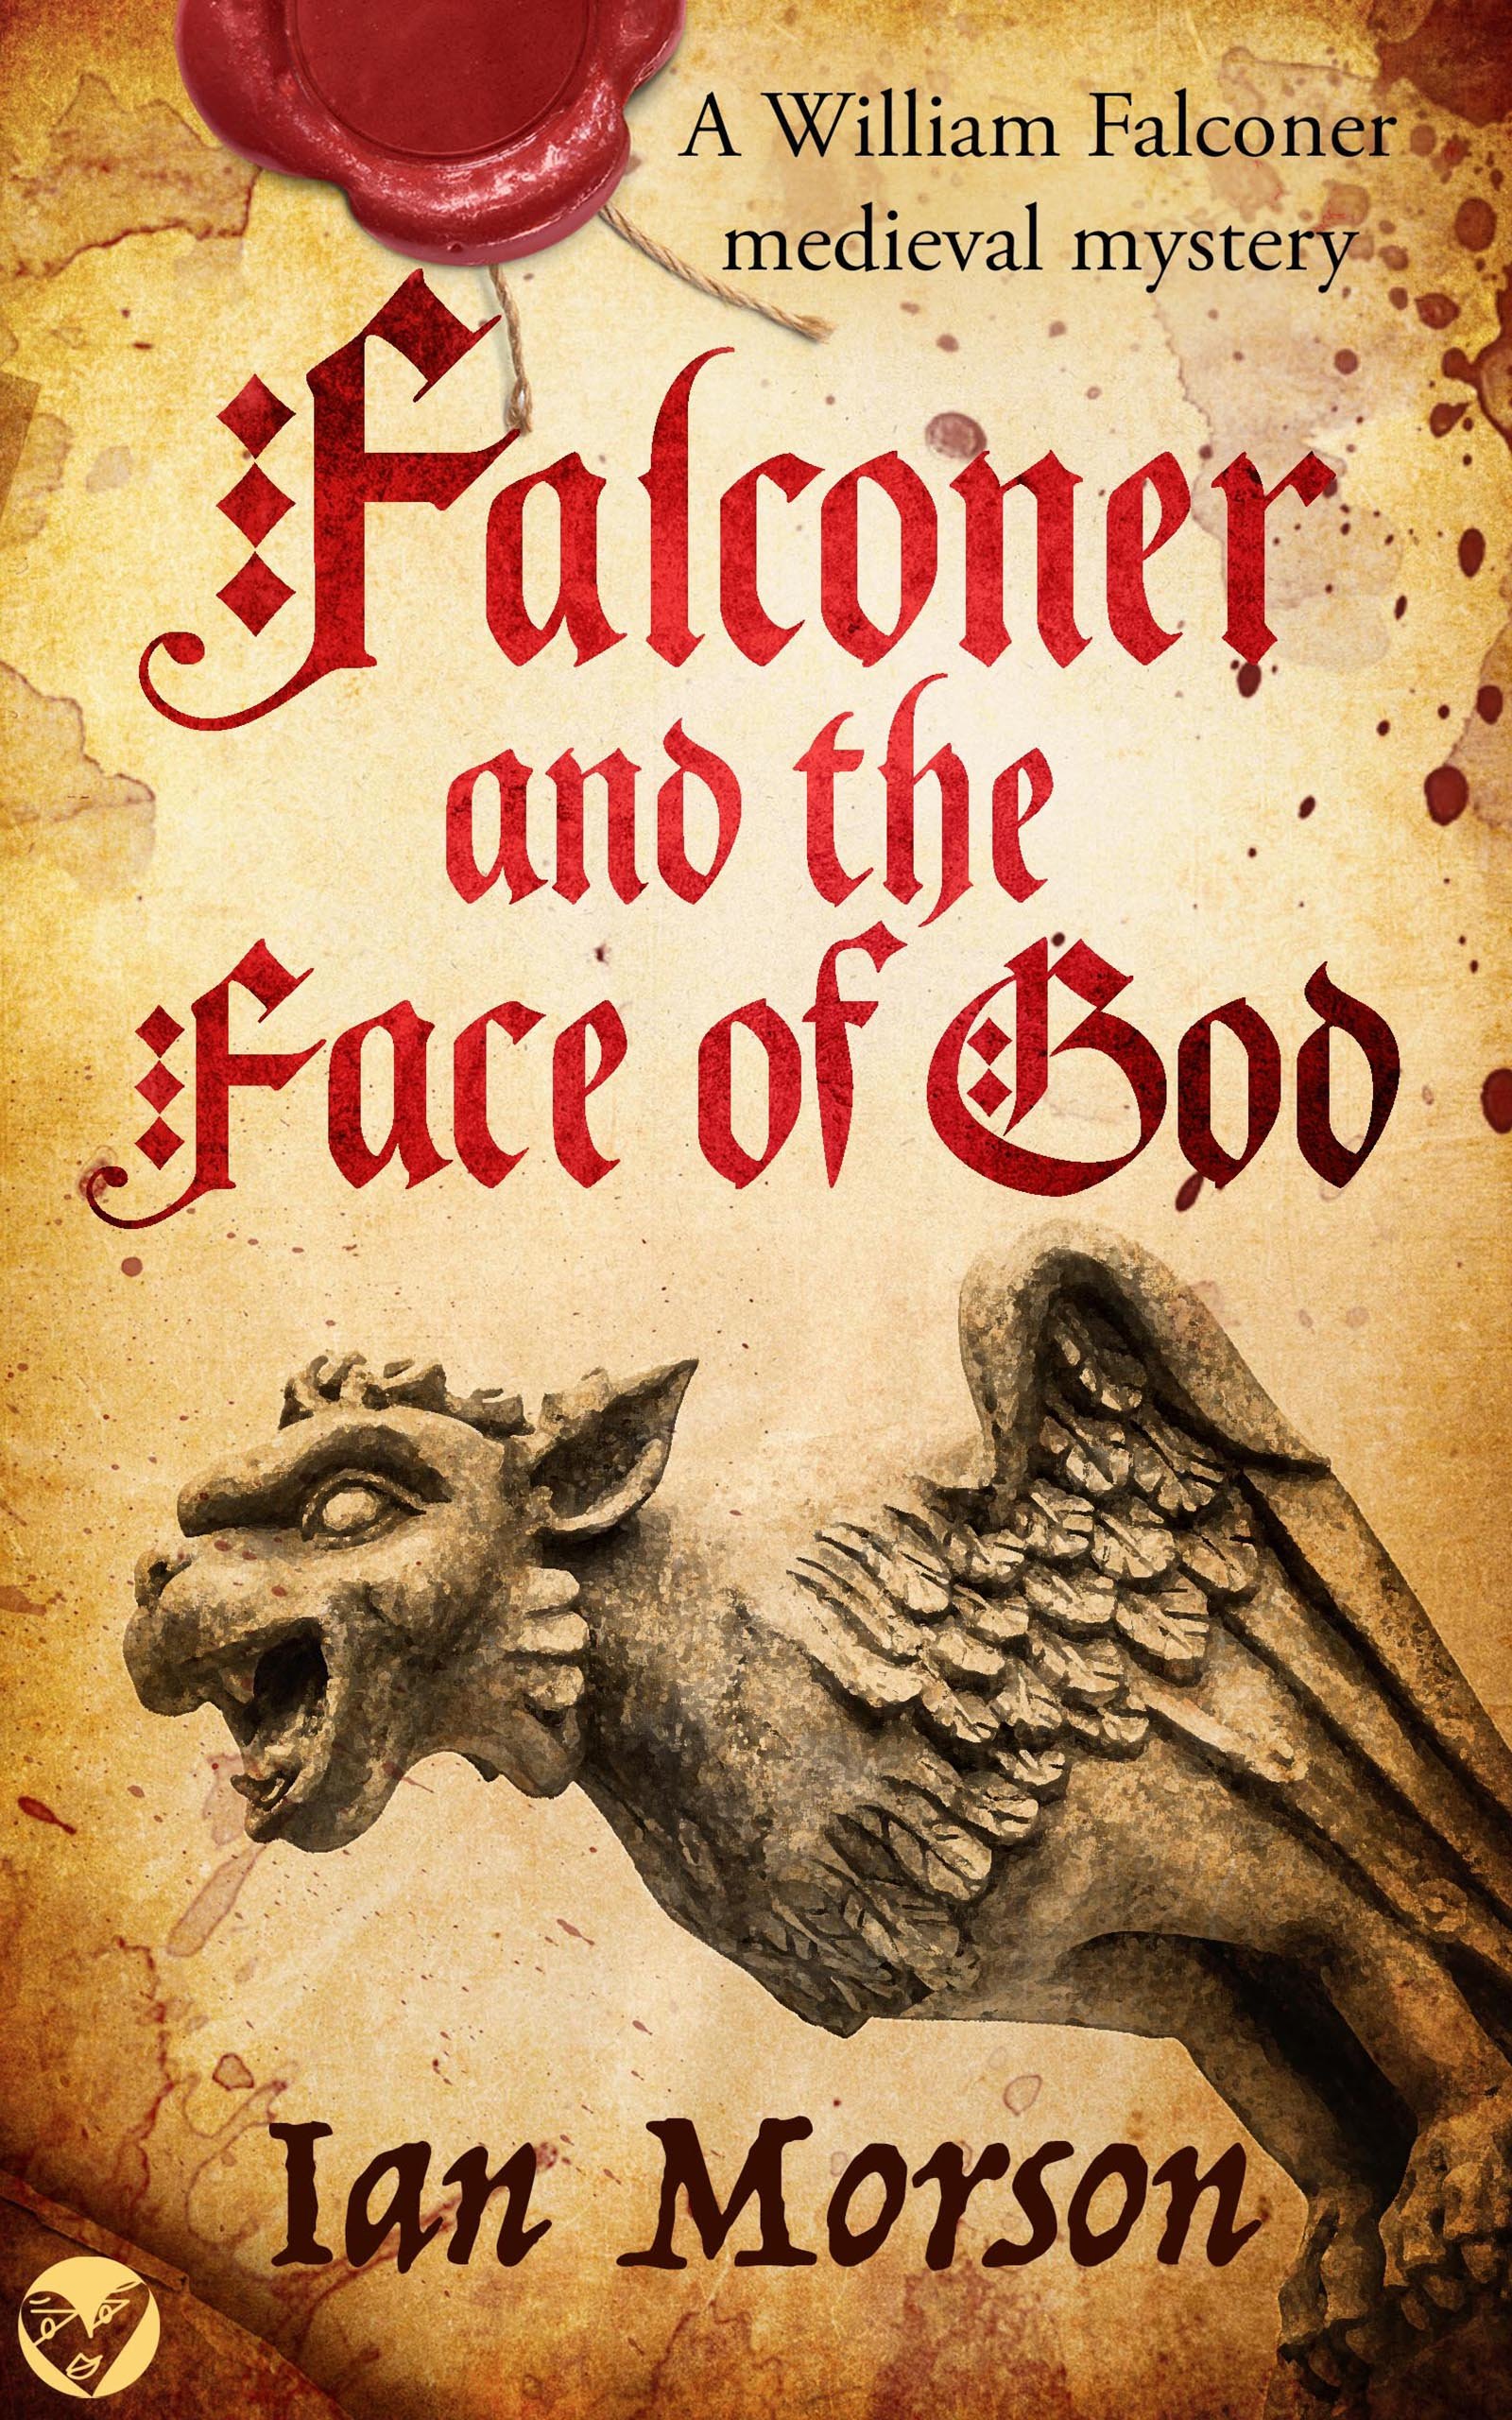 FALCONER AND THE FACE OF GOD Cover publish.jpg